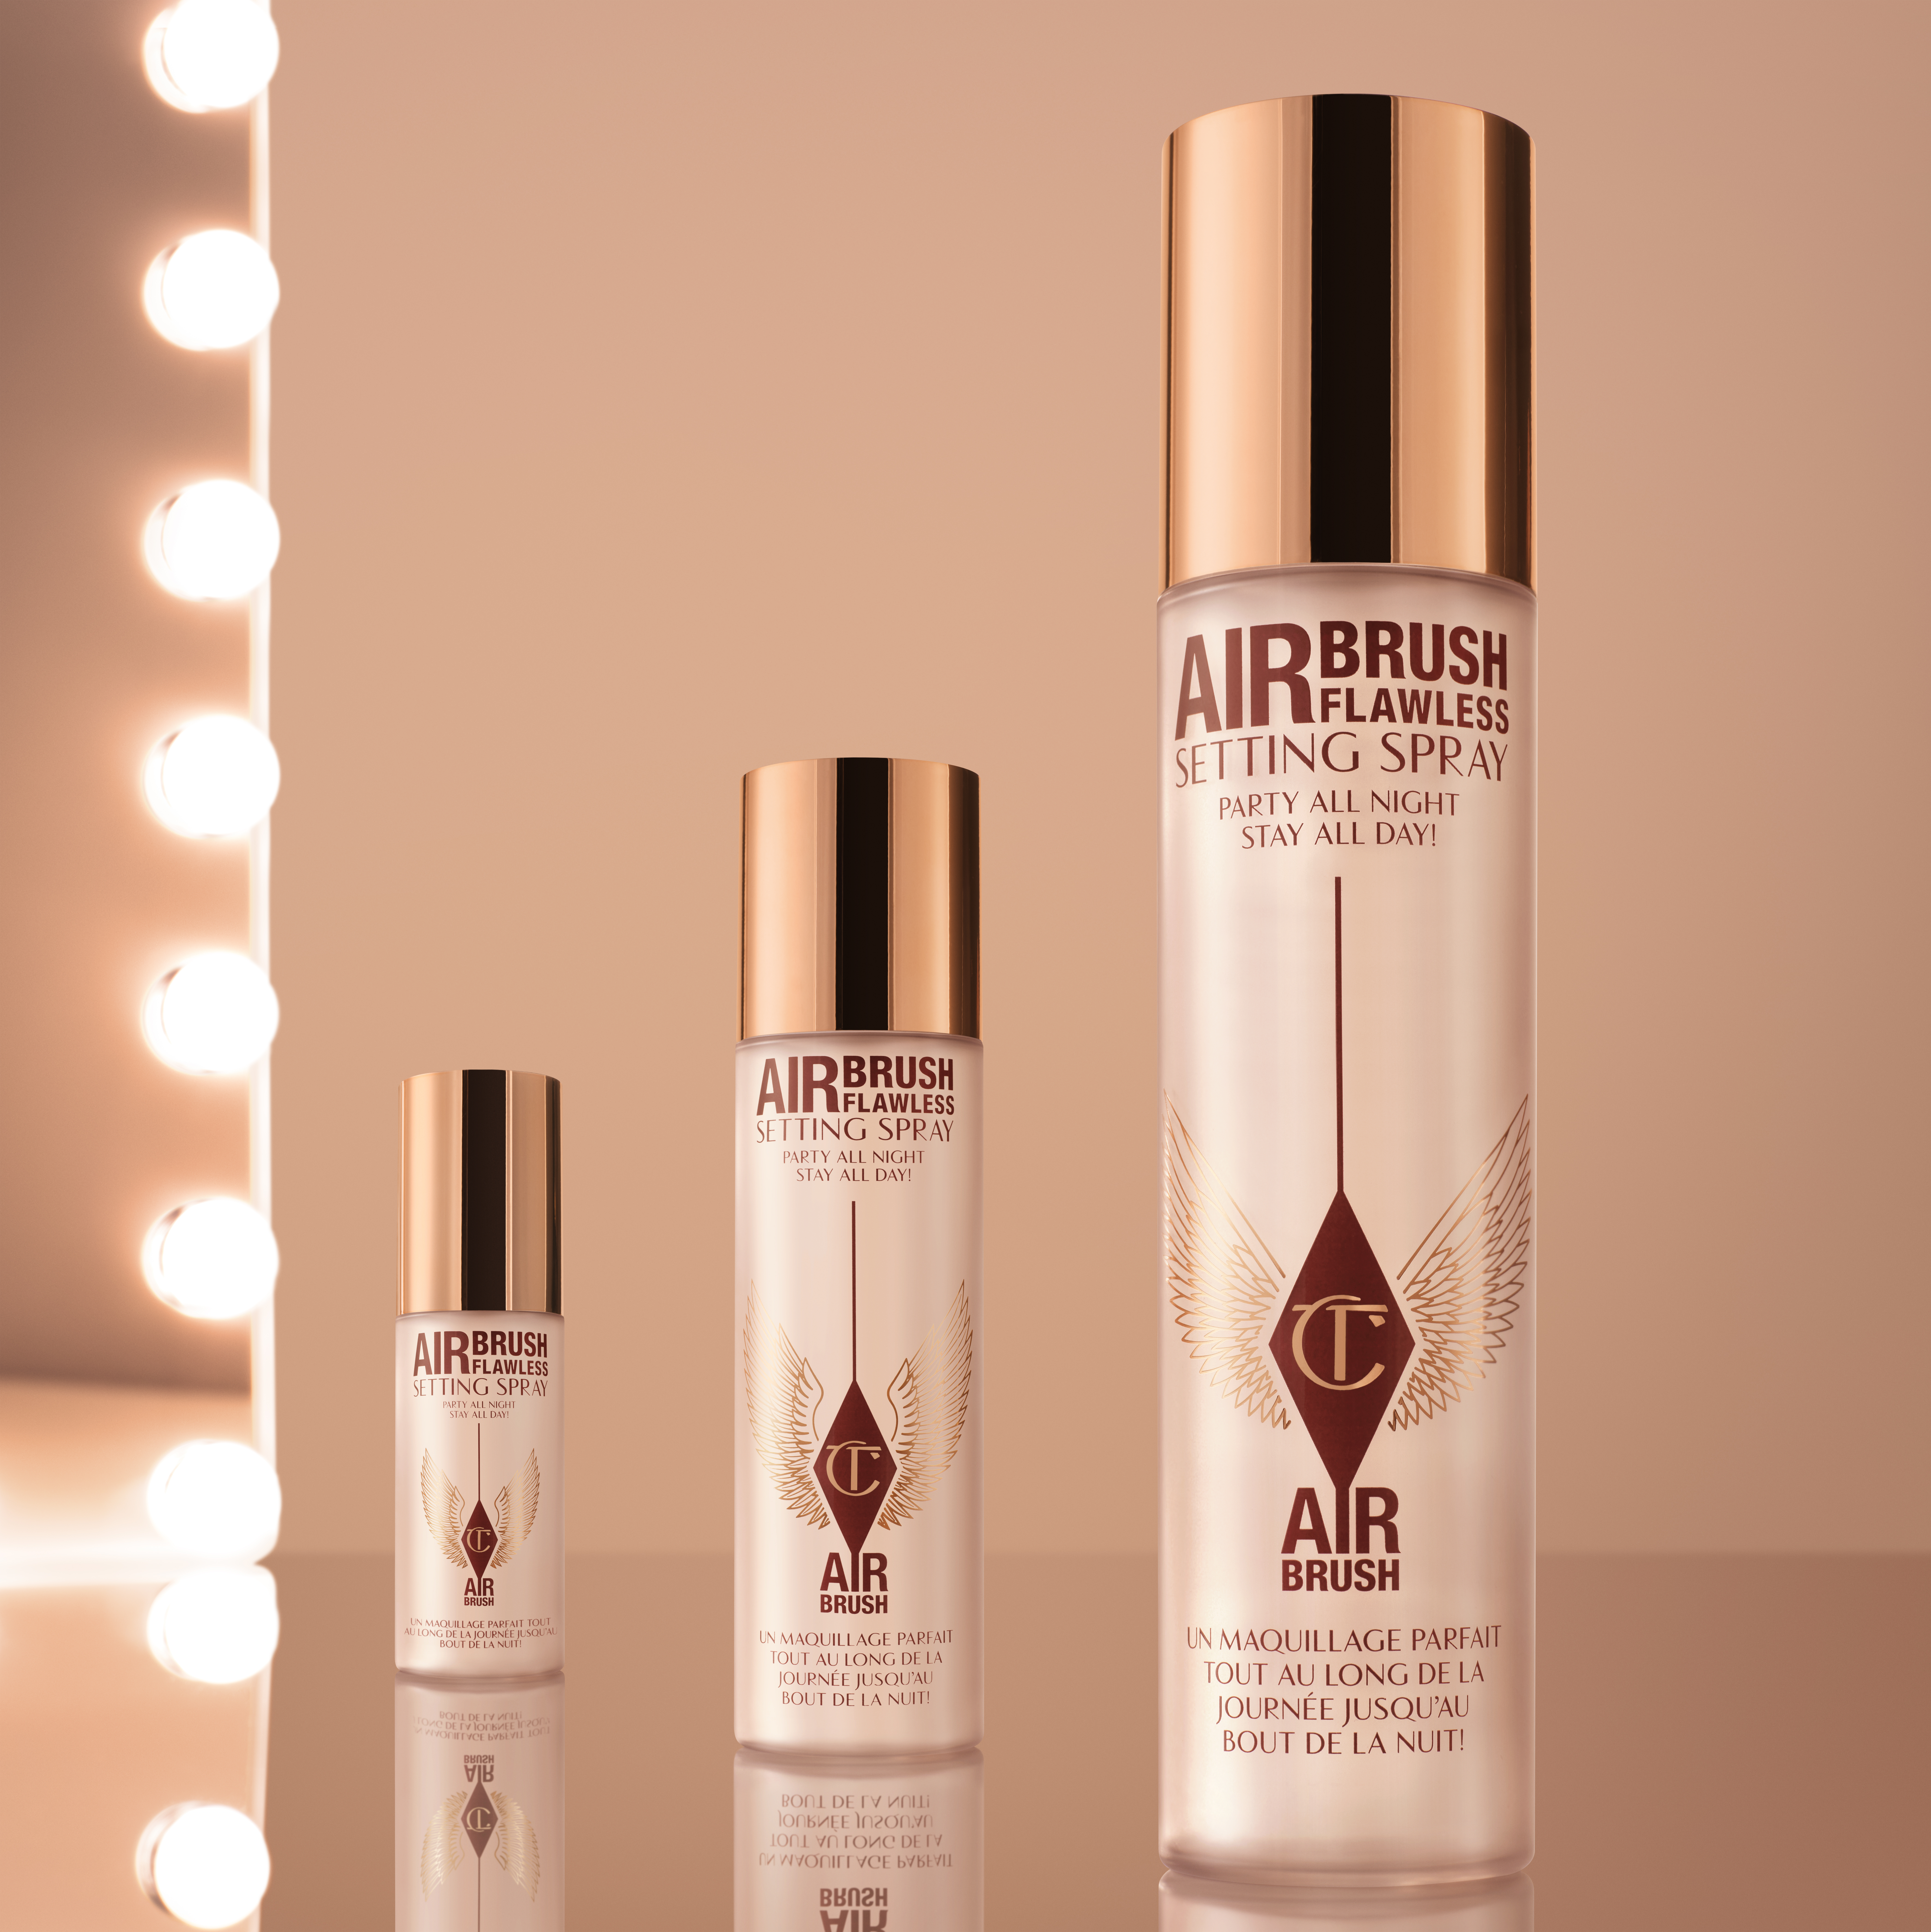 Travel, regular and supersize versions of Airbrush Flawless Setting Spray